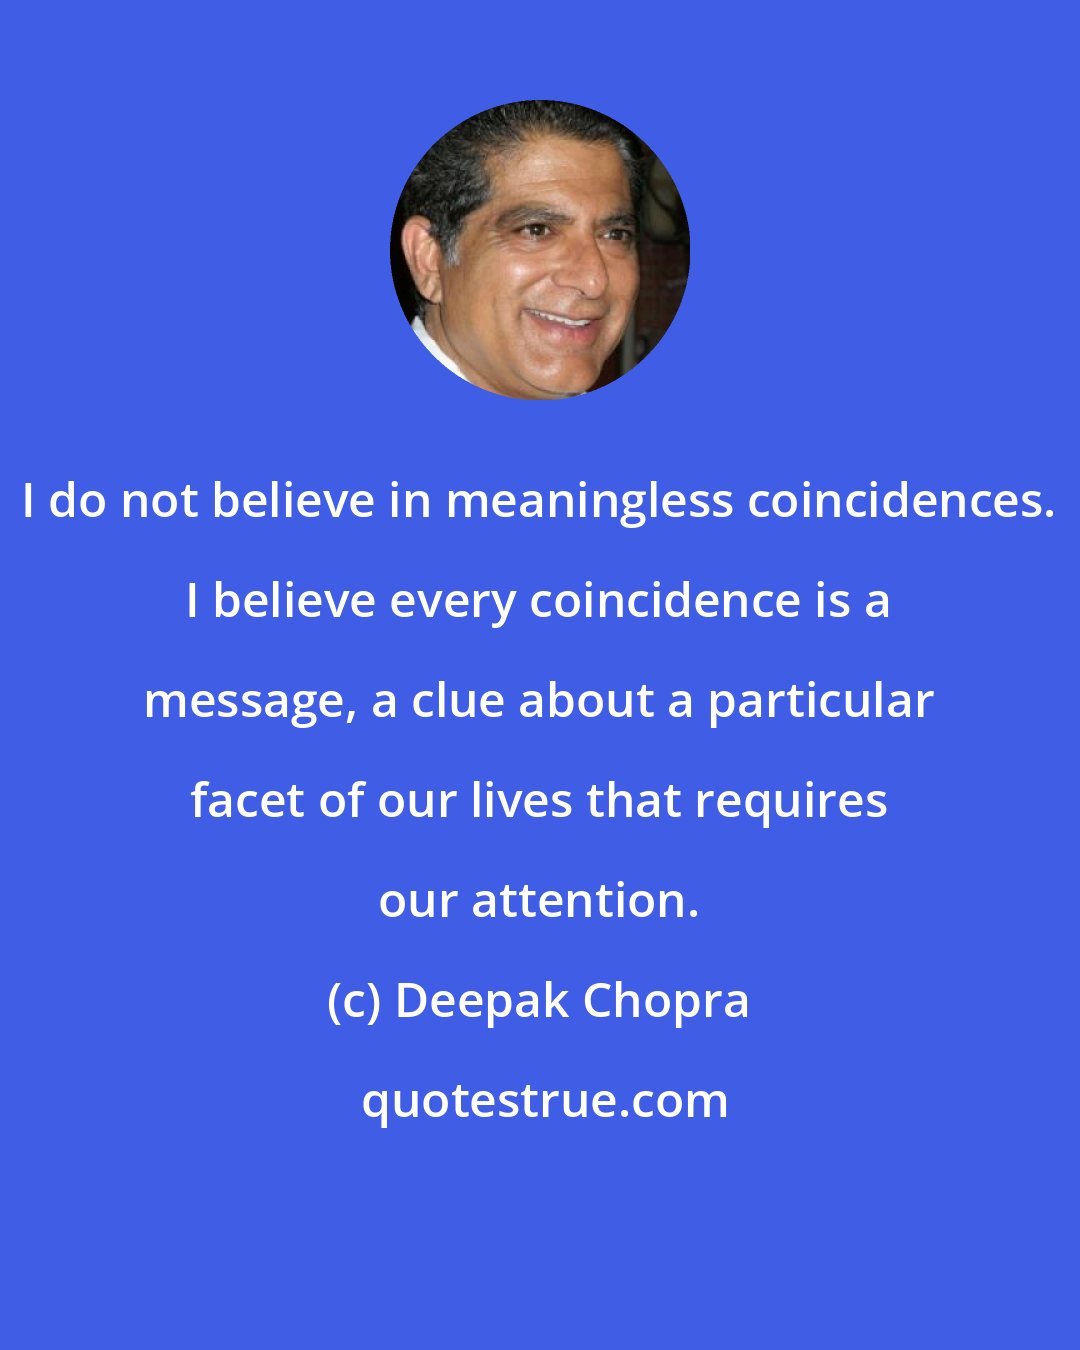 Deepak Chopra: I do not believe in meaningless coincidences. I believe every coincidence is a message, a clue about a particular facet of our lives that requires our attention.